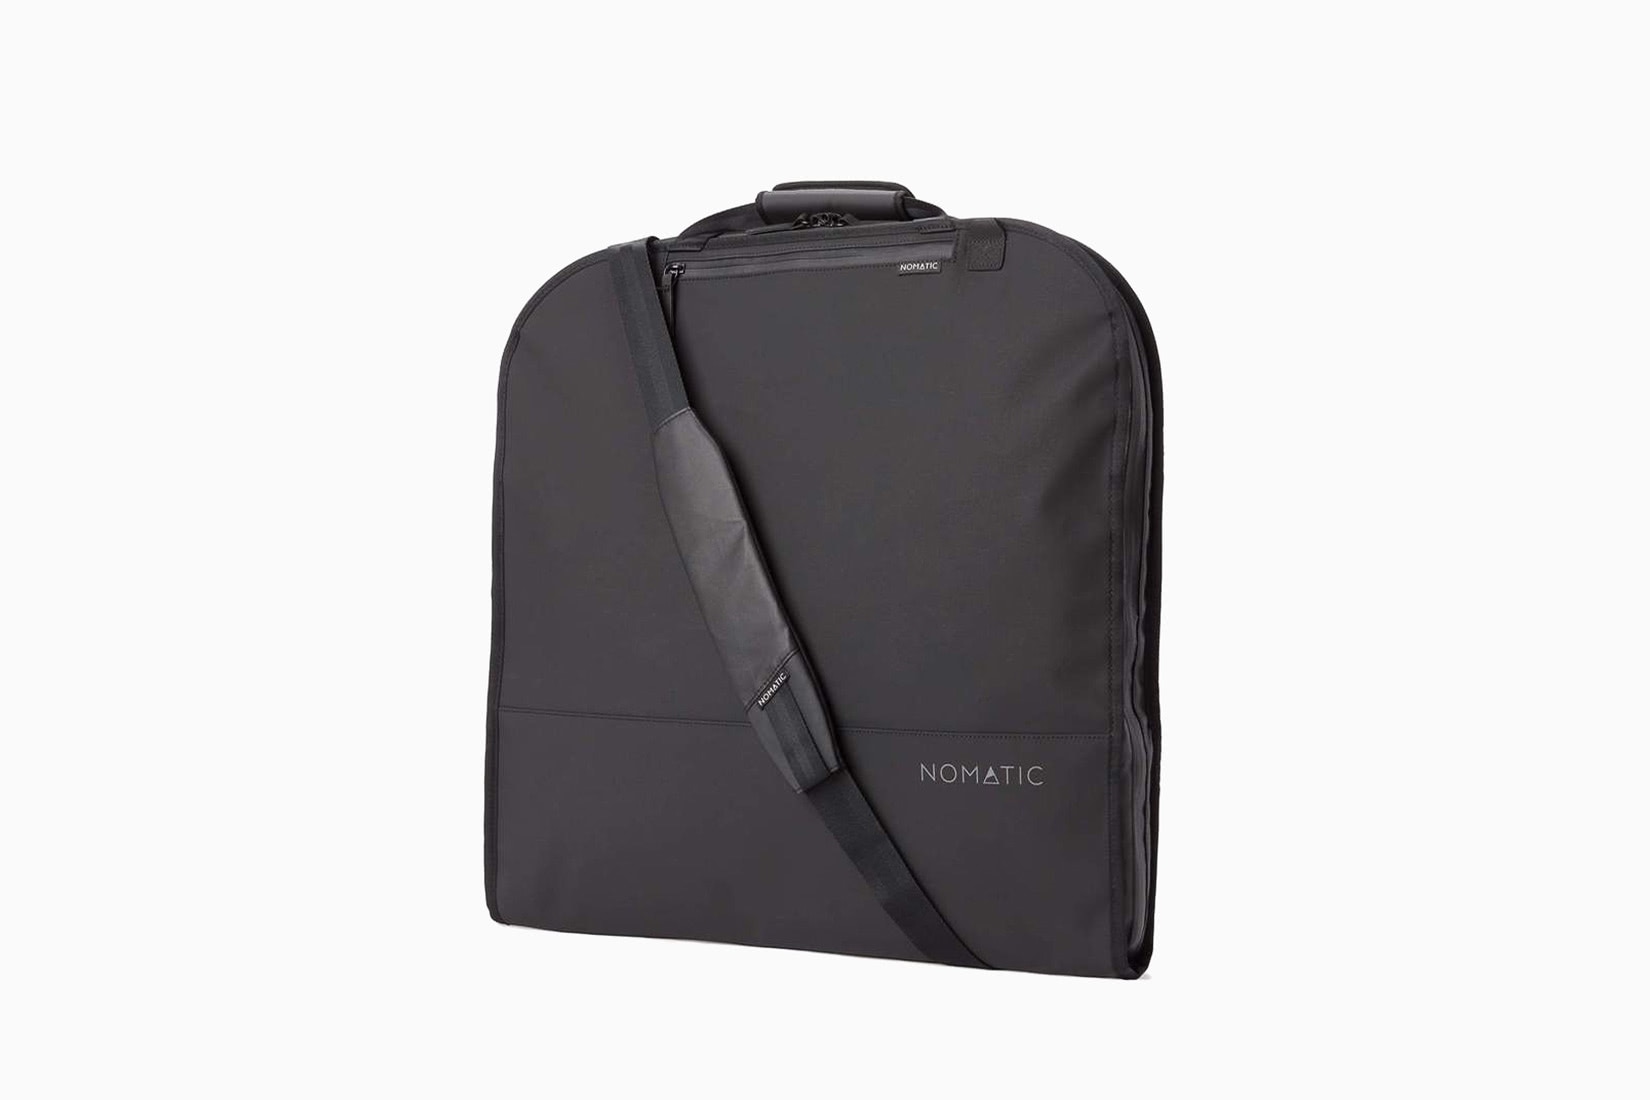 best garment bags nomatic review - Luxe Digital